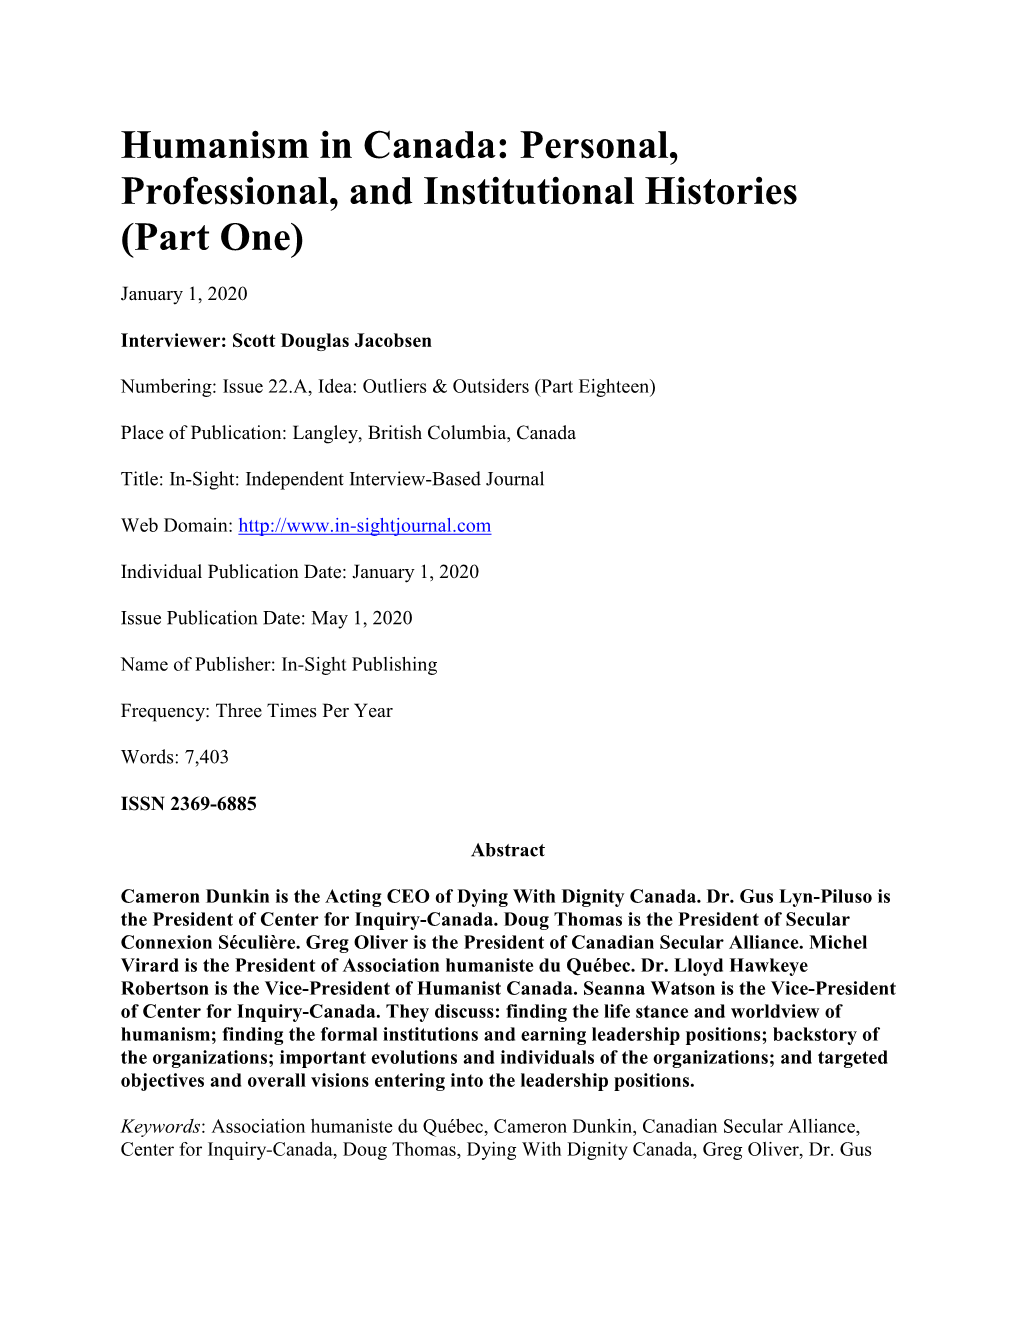 Humanism in Canada: Personal, Professional, and Institutional Histories (Part One)